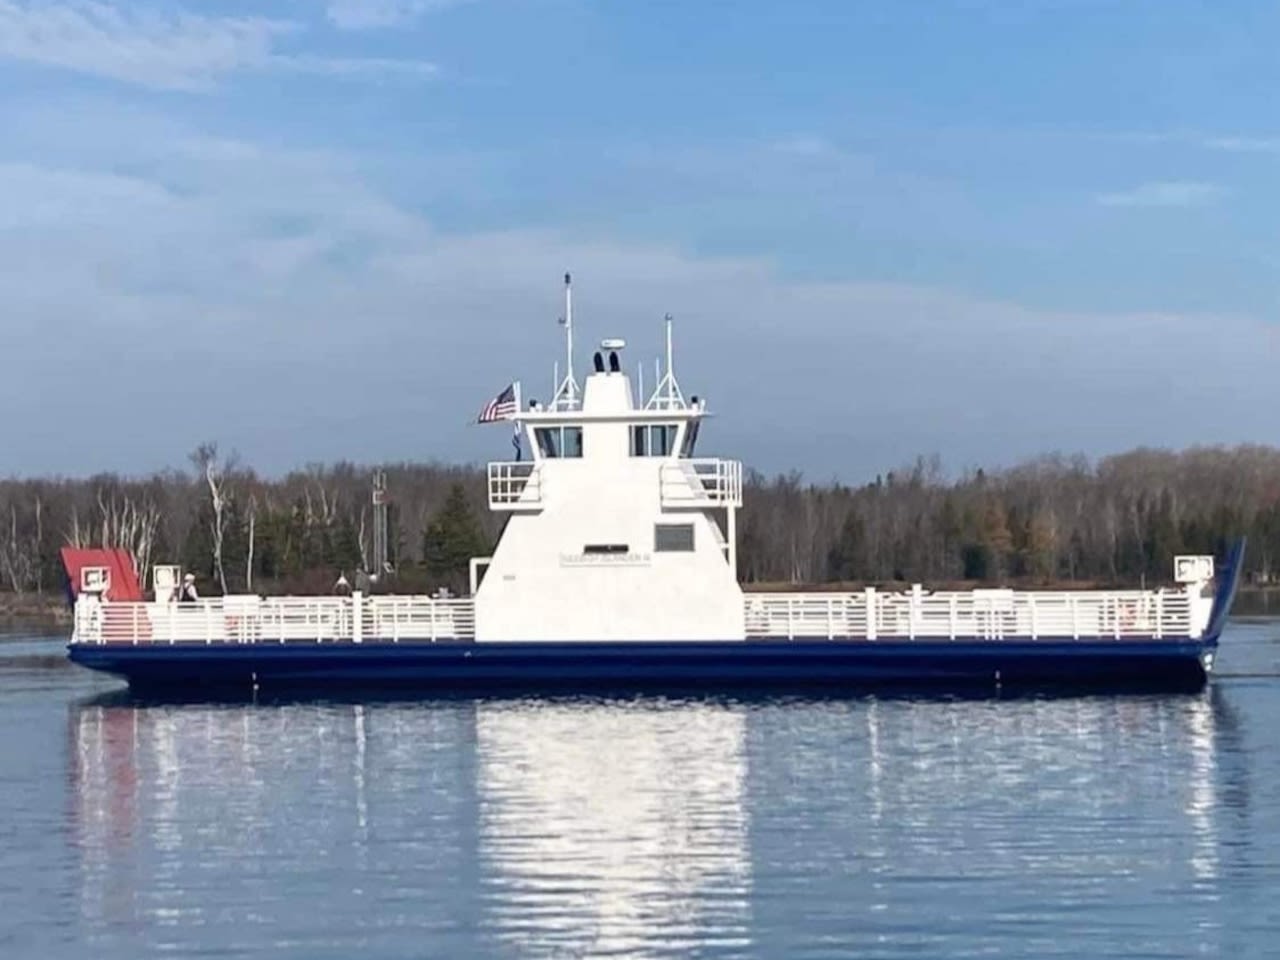 With ferry service facing cuts, an island in Northern Michigan fears for its future